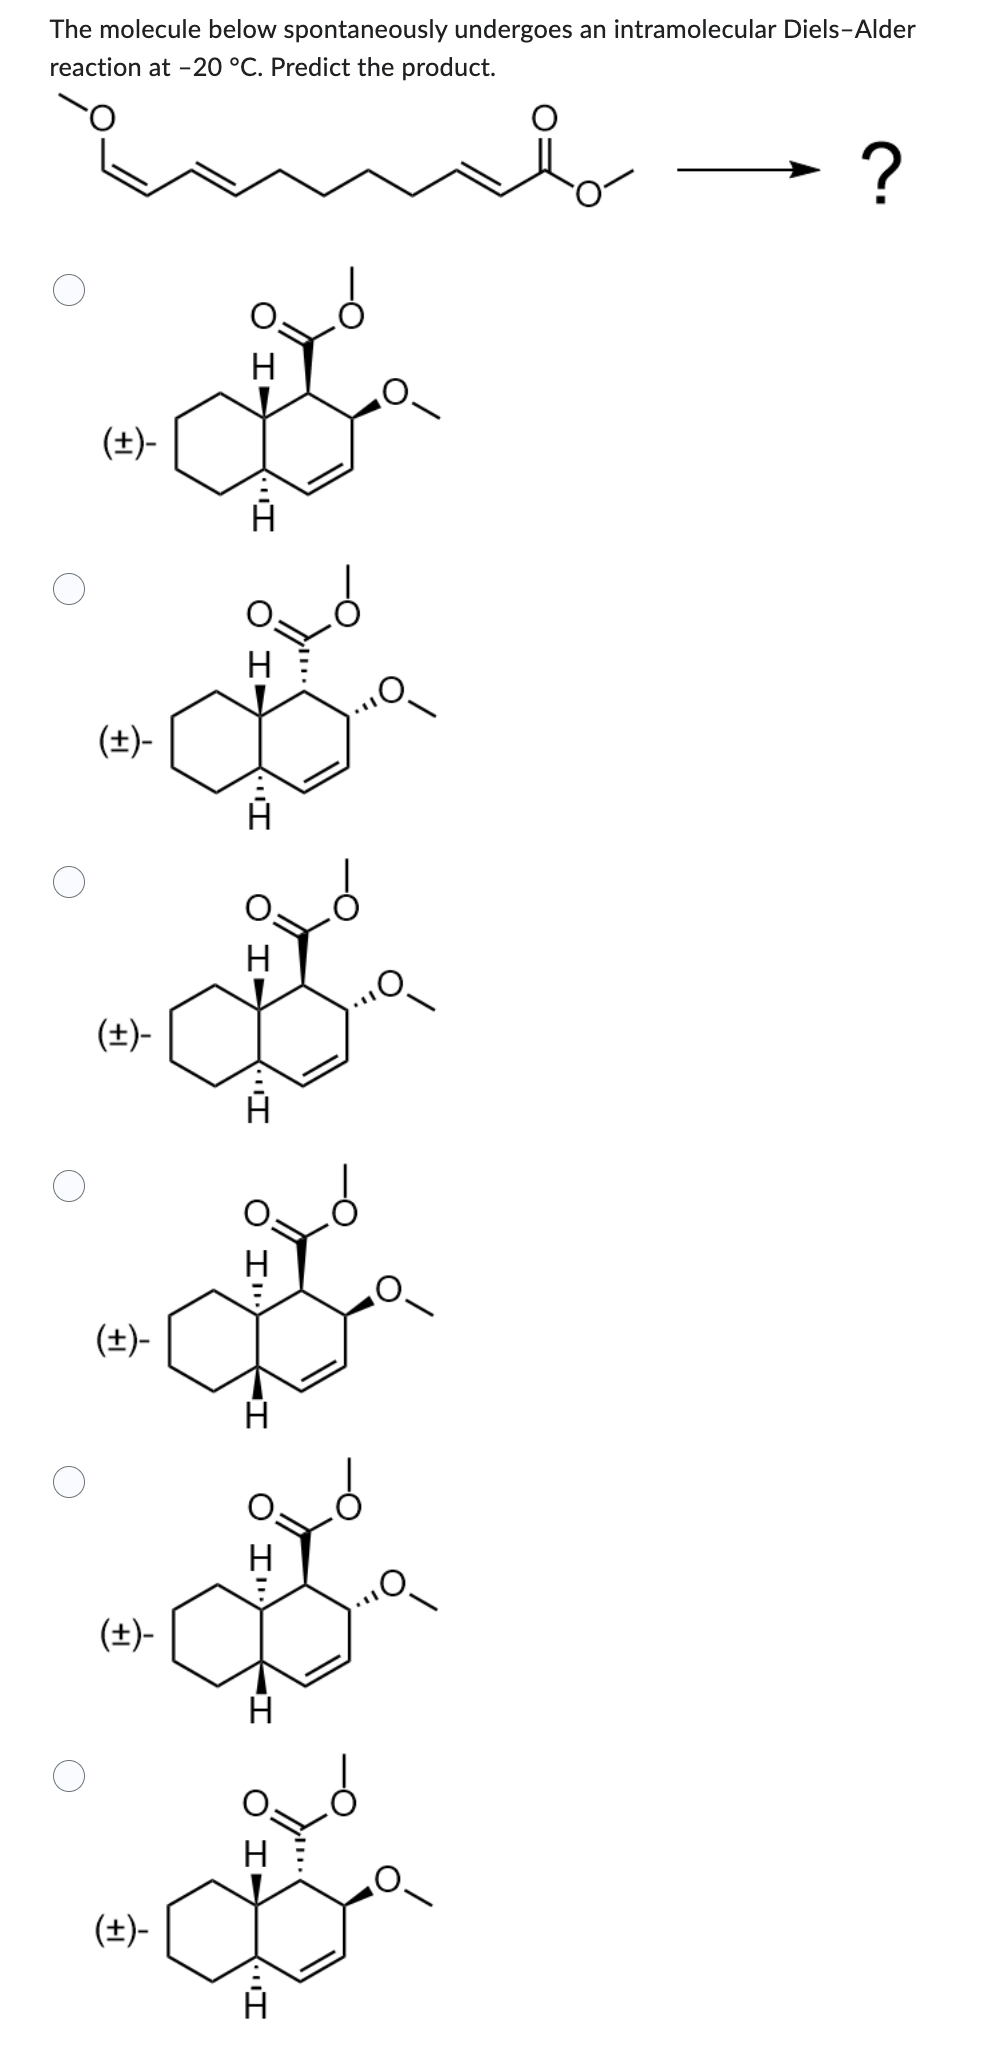 The molecule below spontaneously undergoes an intramolecular Diels-Alder
reaction at -20 °C. Predict the product.
(+)-
(+)-
(+)-
(±)-
(+)-
(±)-
H
"I
H
I
I
H
A
O
?